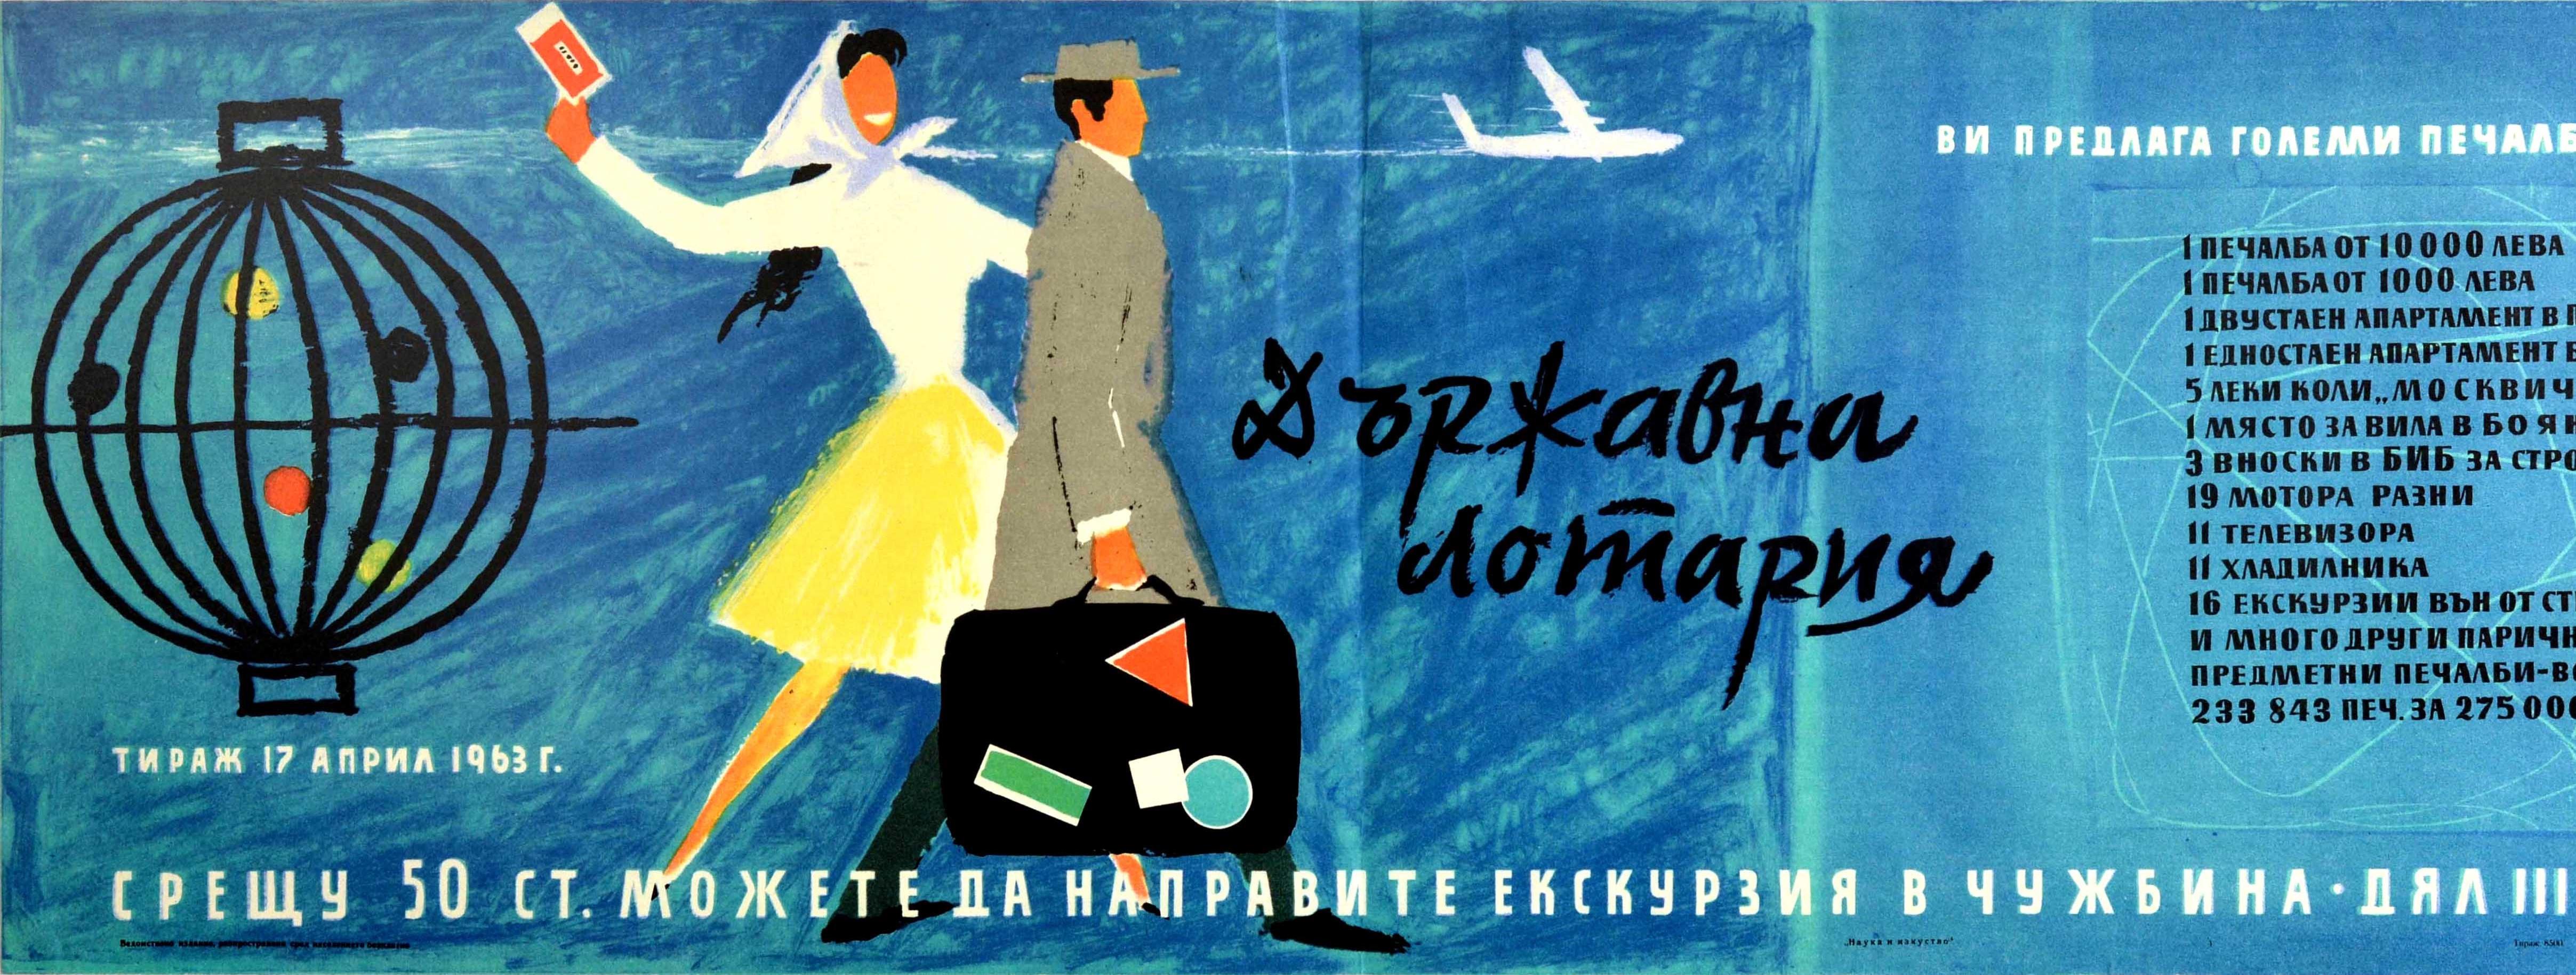 Original vintage advertising poster for the Bulgarian State Lottery - For 50 cents you can make a trip abroad! / ???????? ??????? ????? 50 ??. ?????? ?? ????????? ????????? ? ??????? ???! - featuring a great mid-century modern design illustration of